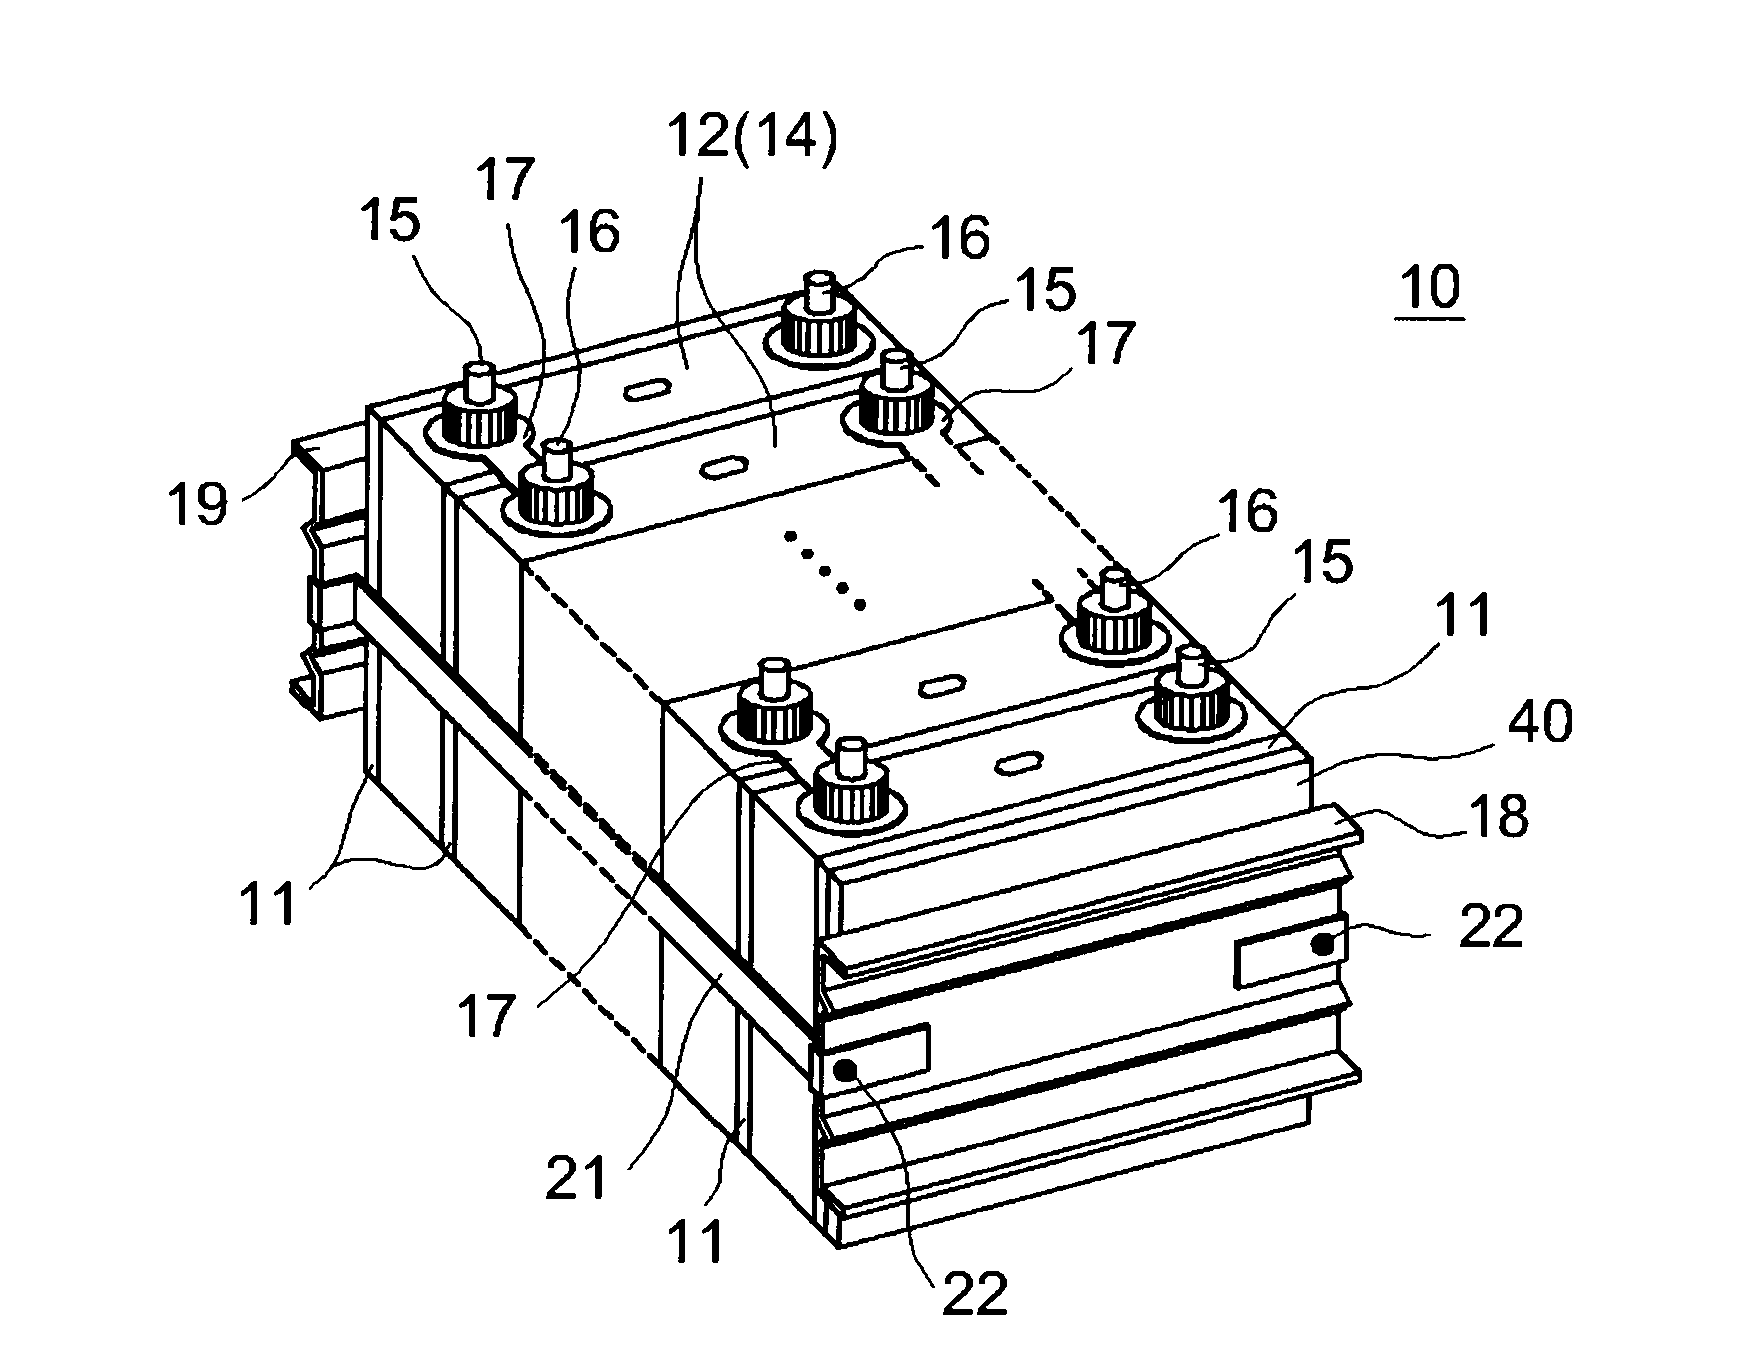 Battery assembly manufacturing method